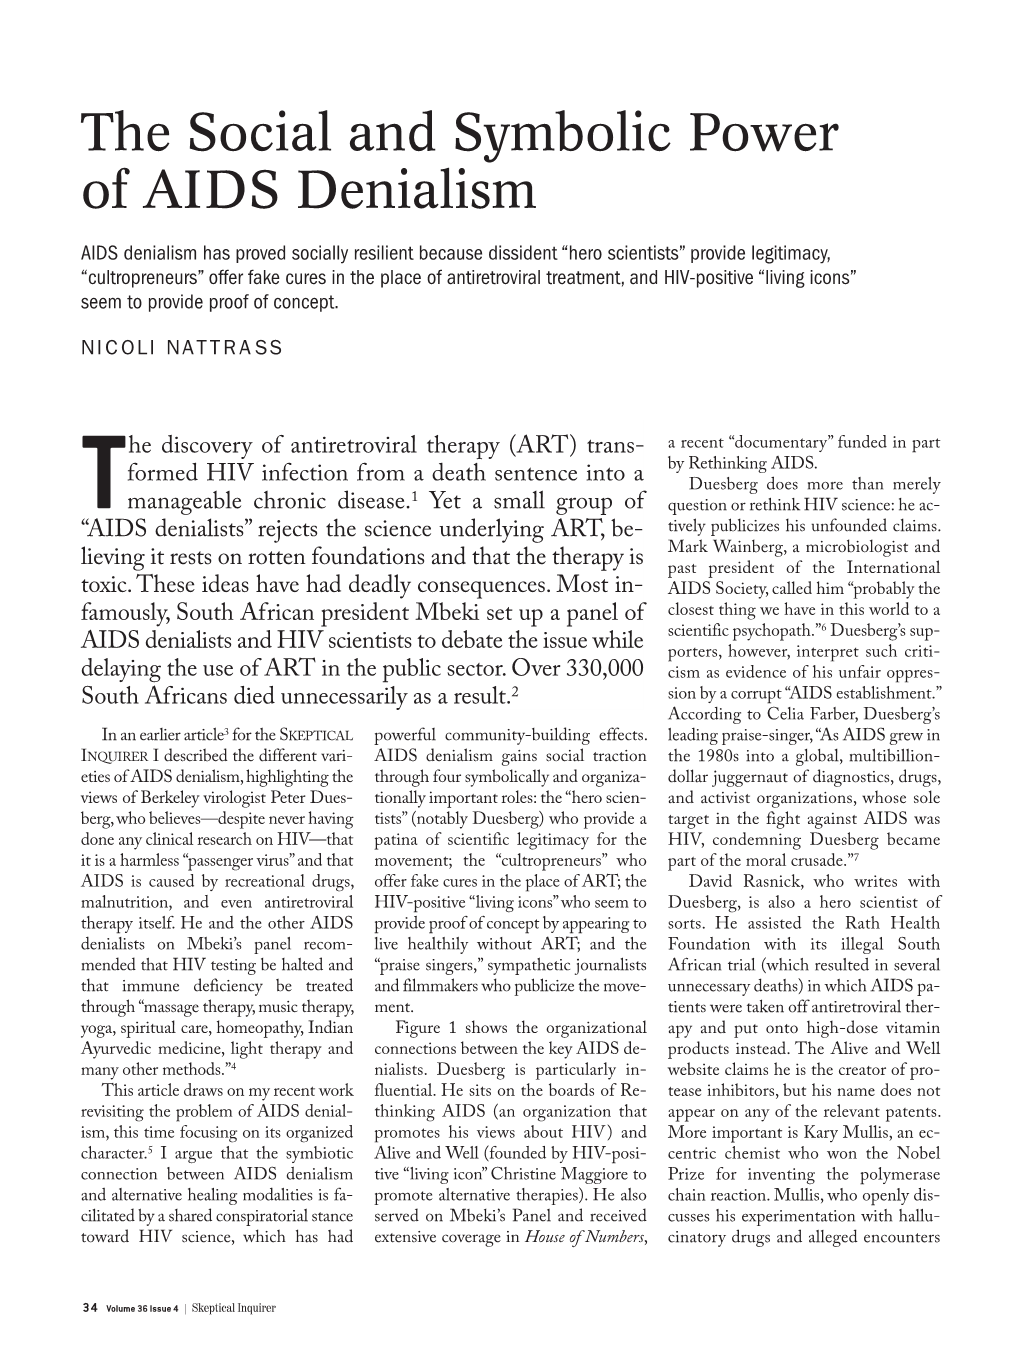 The Social and Symbolic Power of AIDS Denialism